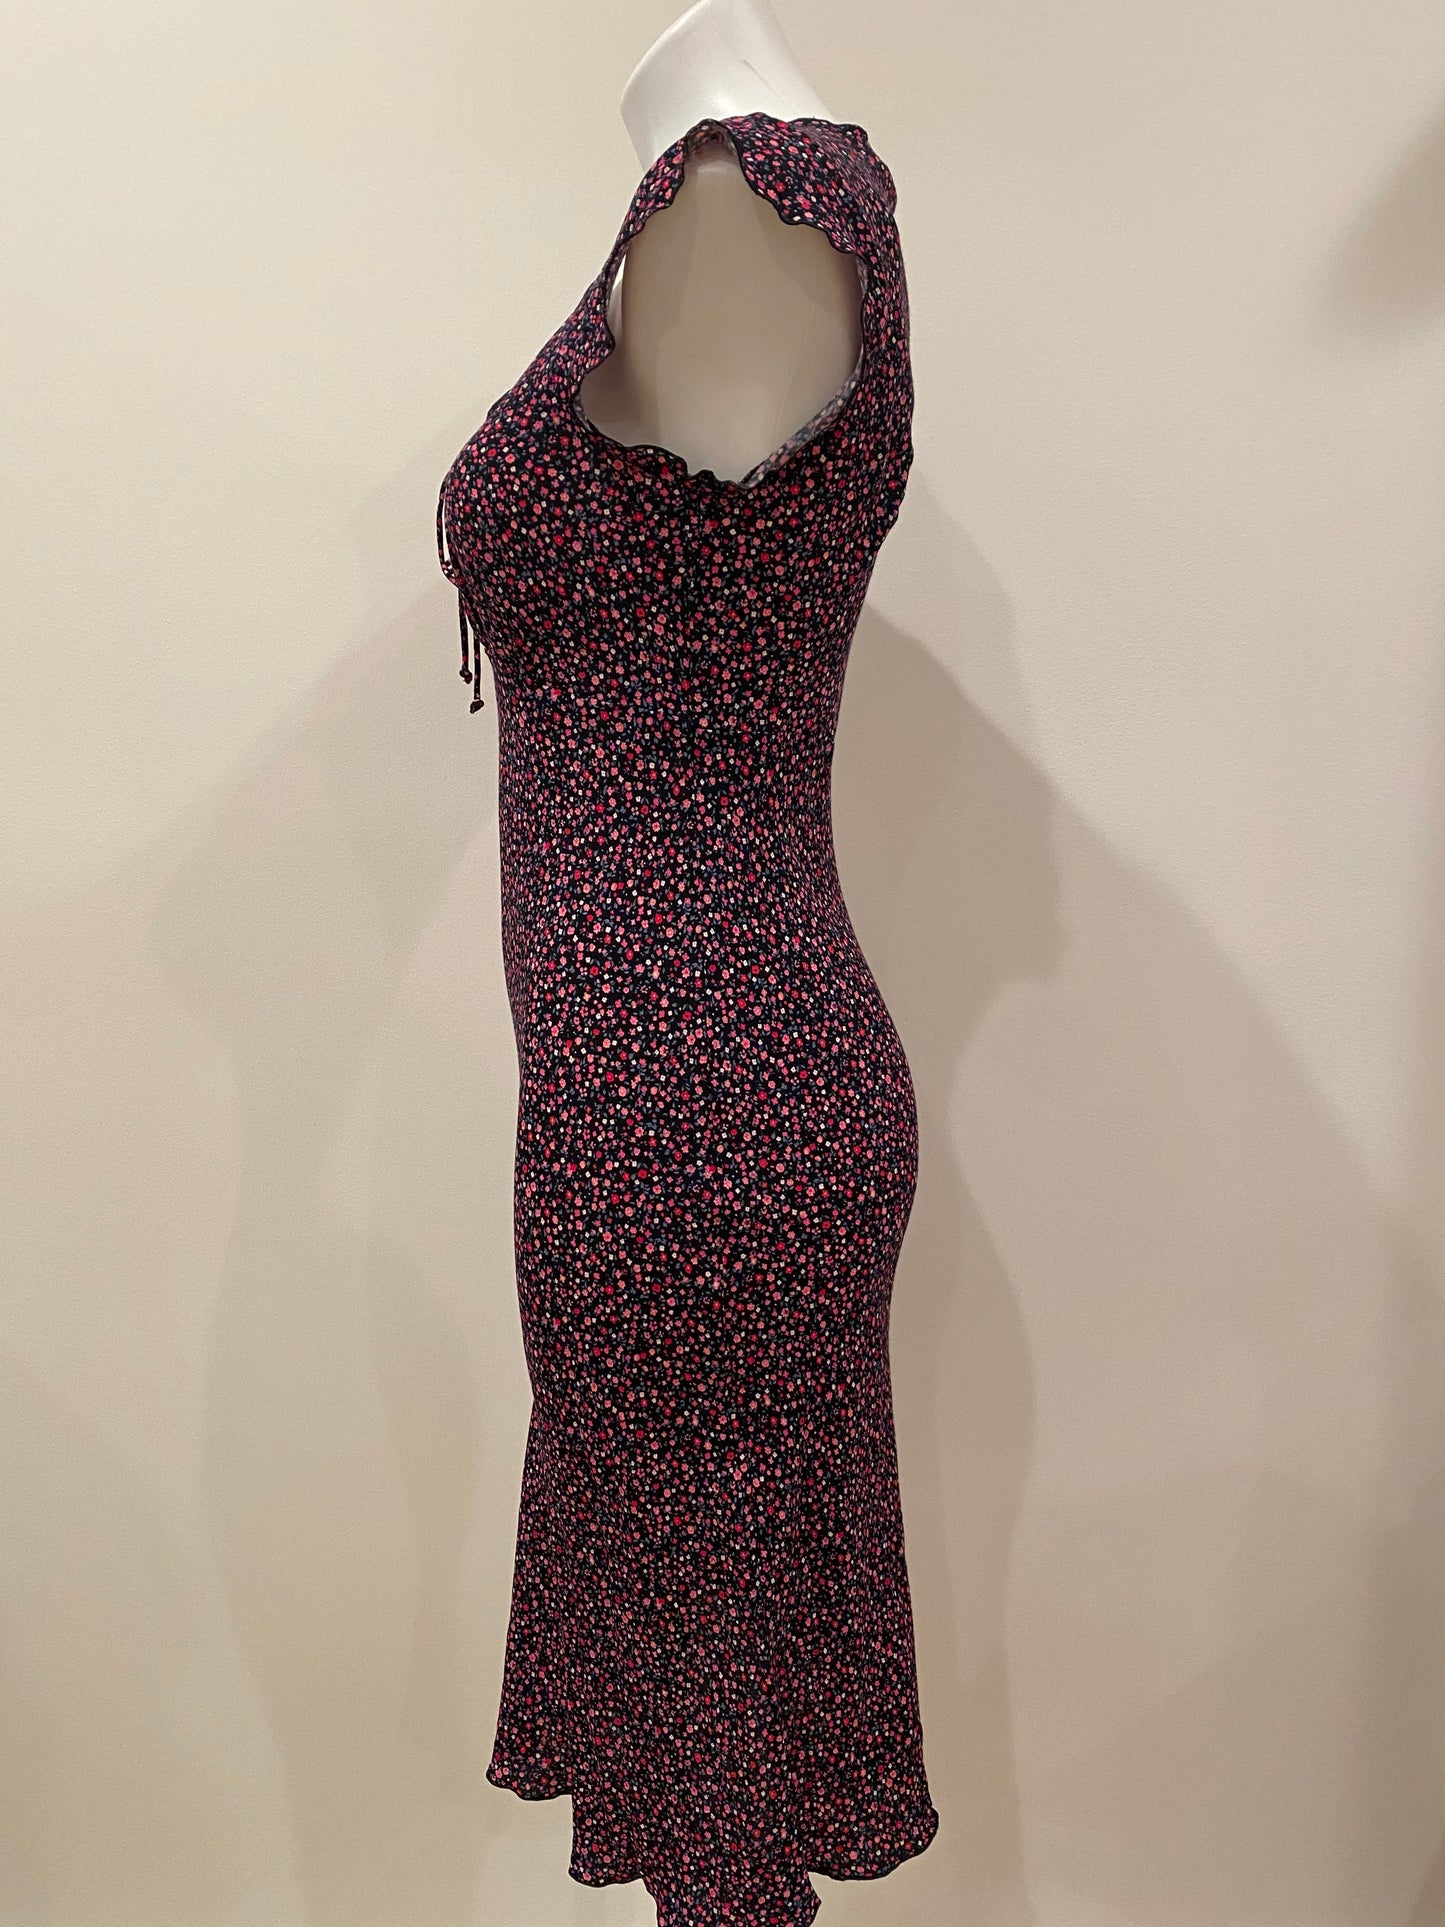 The Robyn Dress, 1990’s